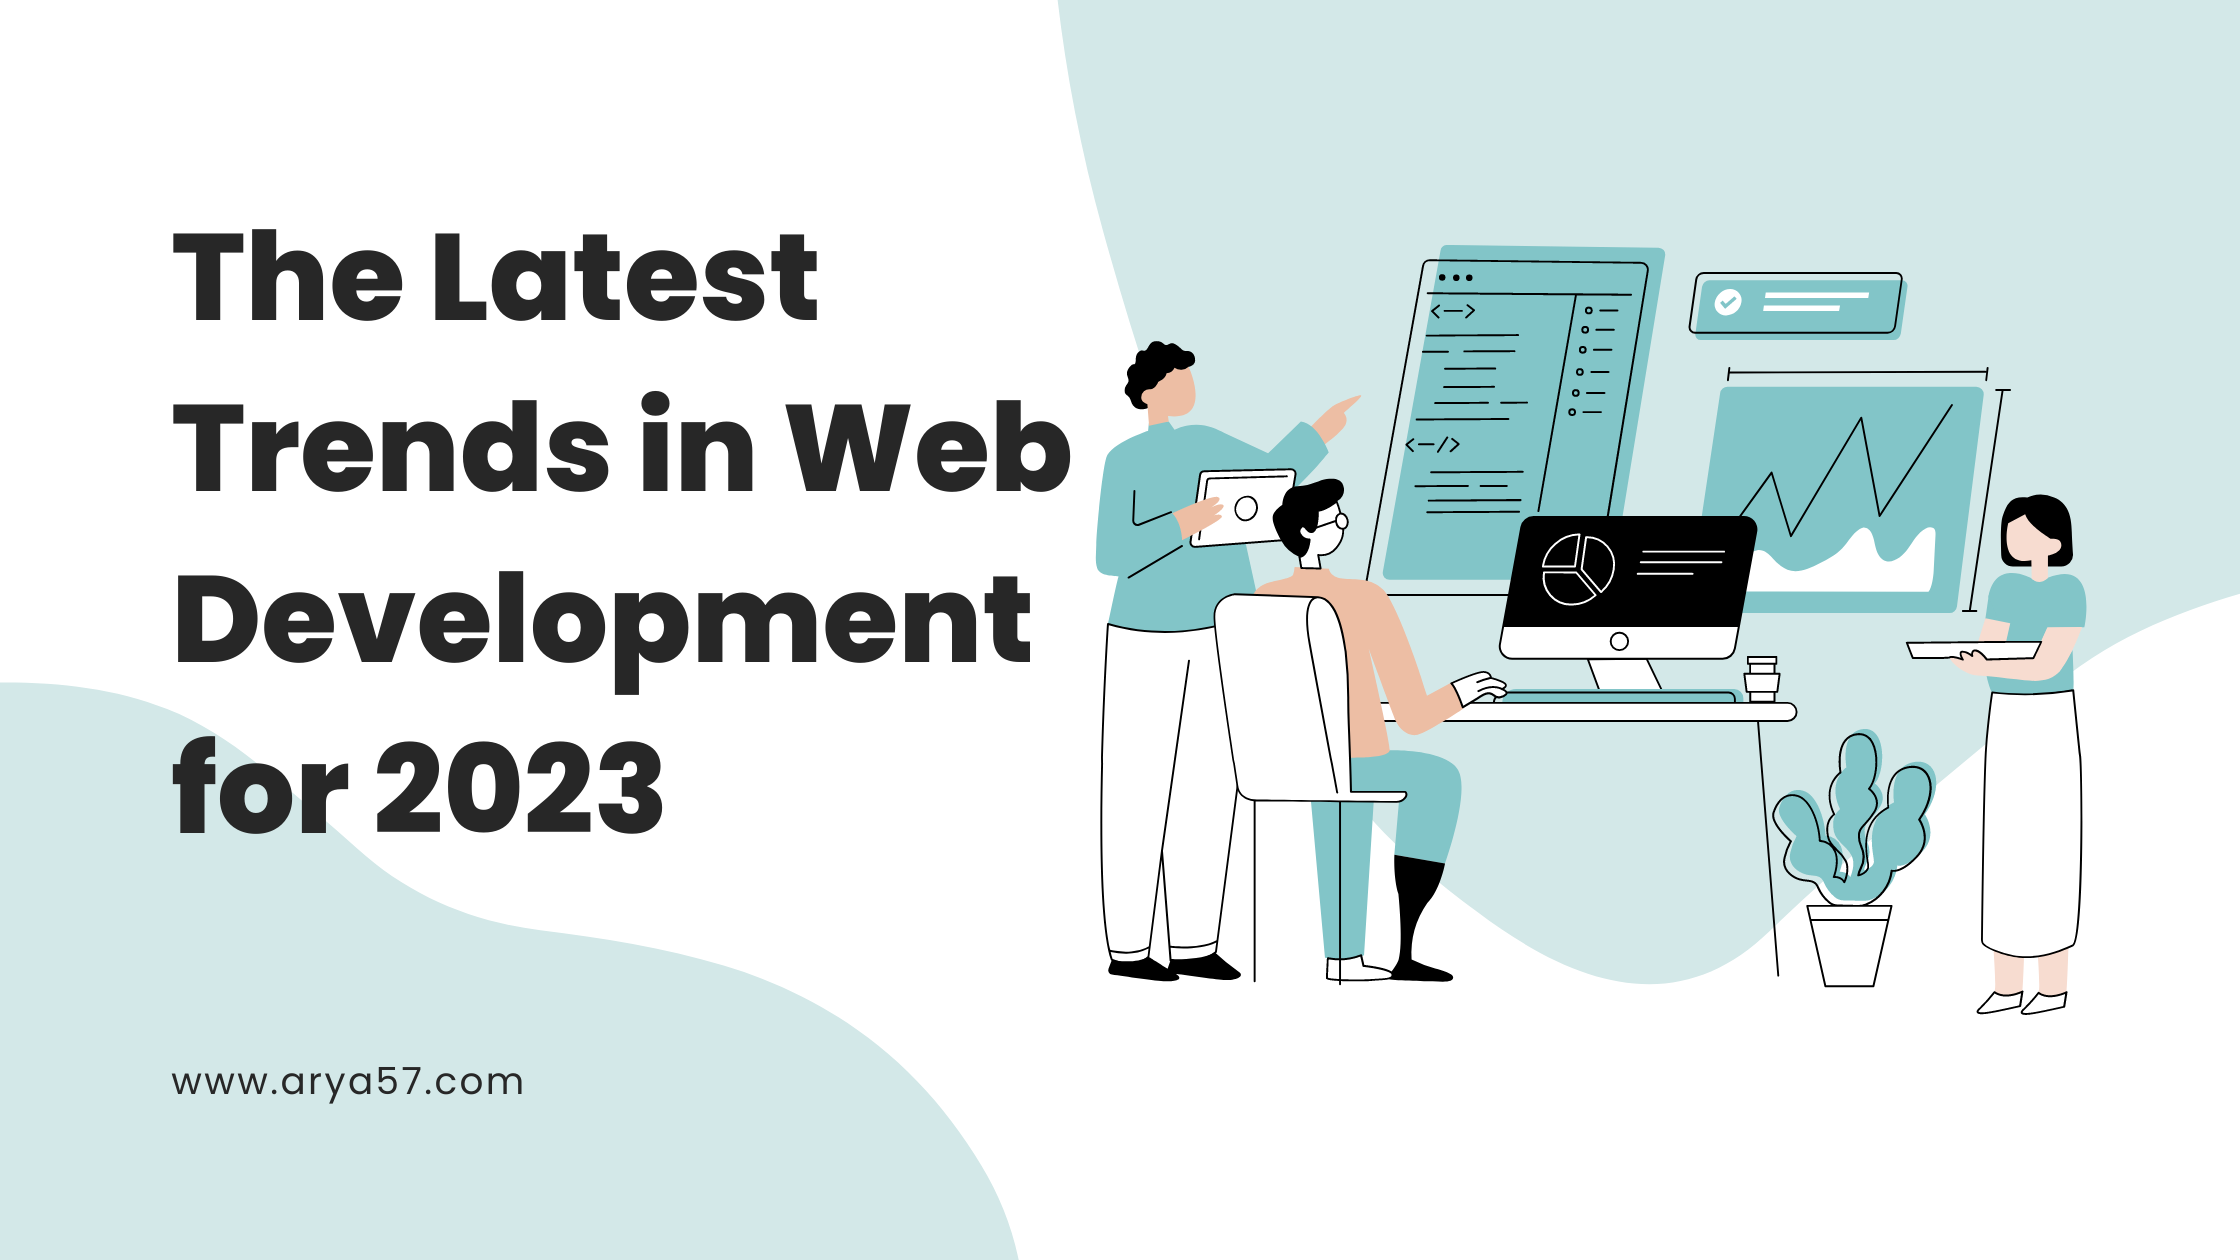 The latest Trends in Web Development for 2023